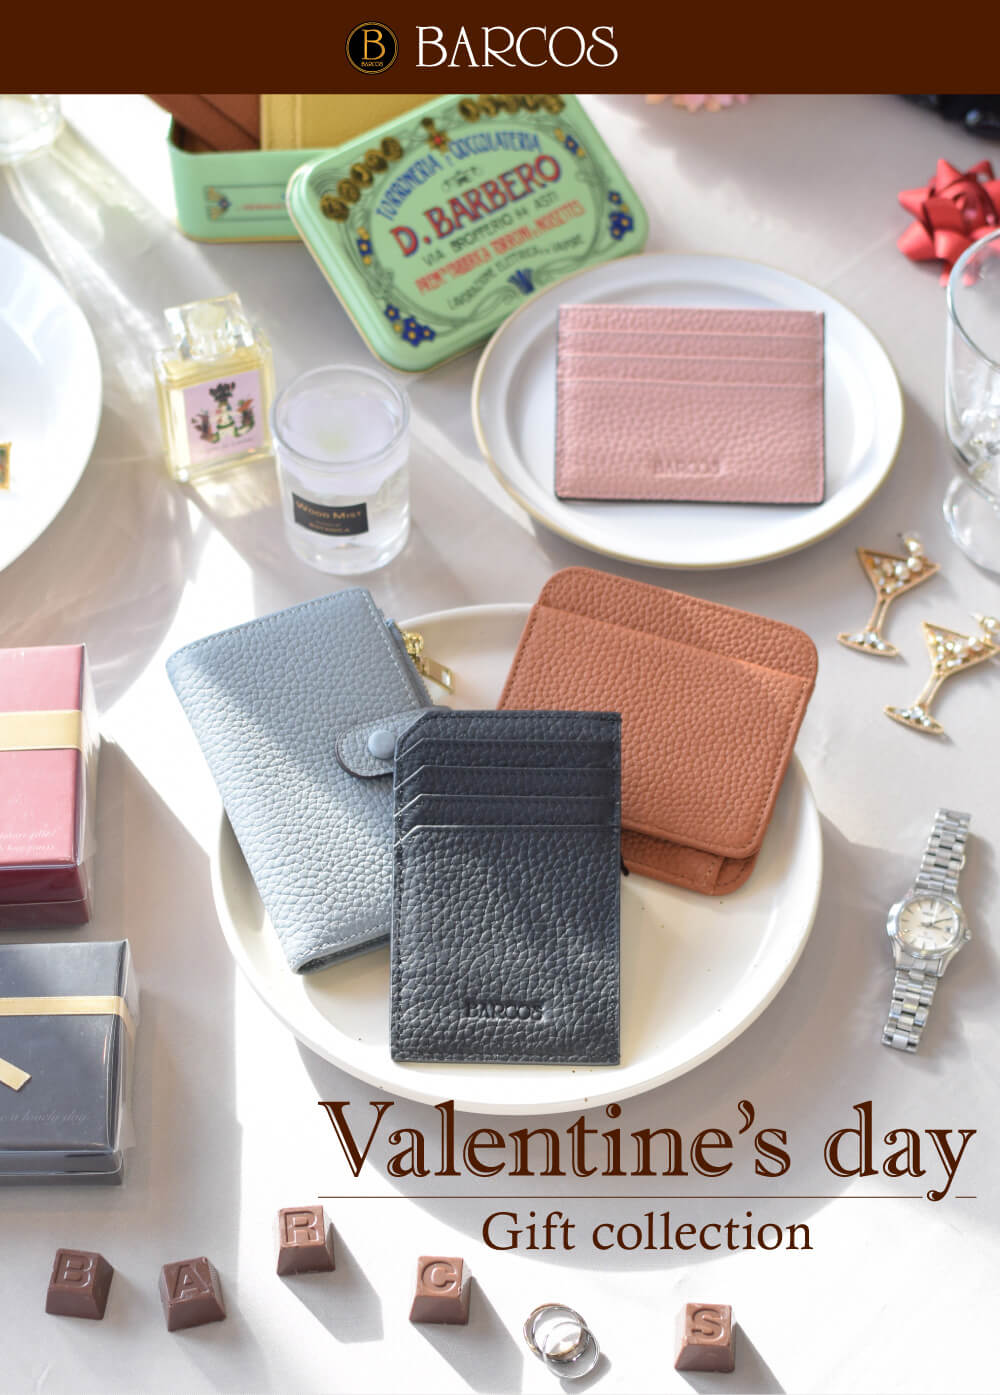 BARCOS｜Valentine's day Gift collection